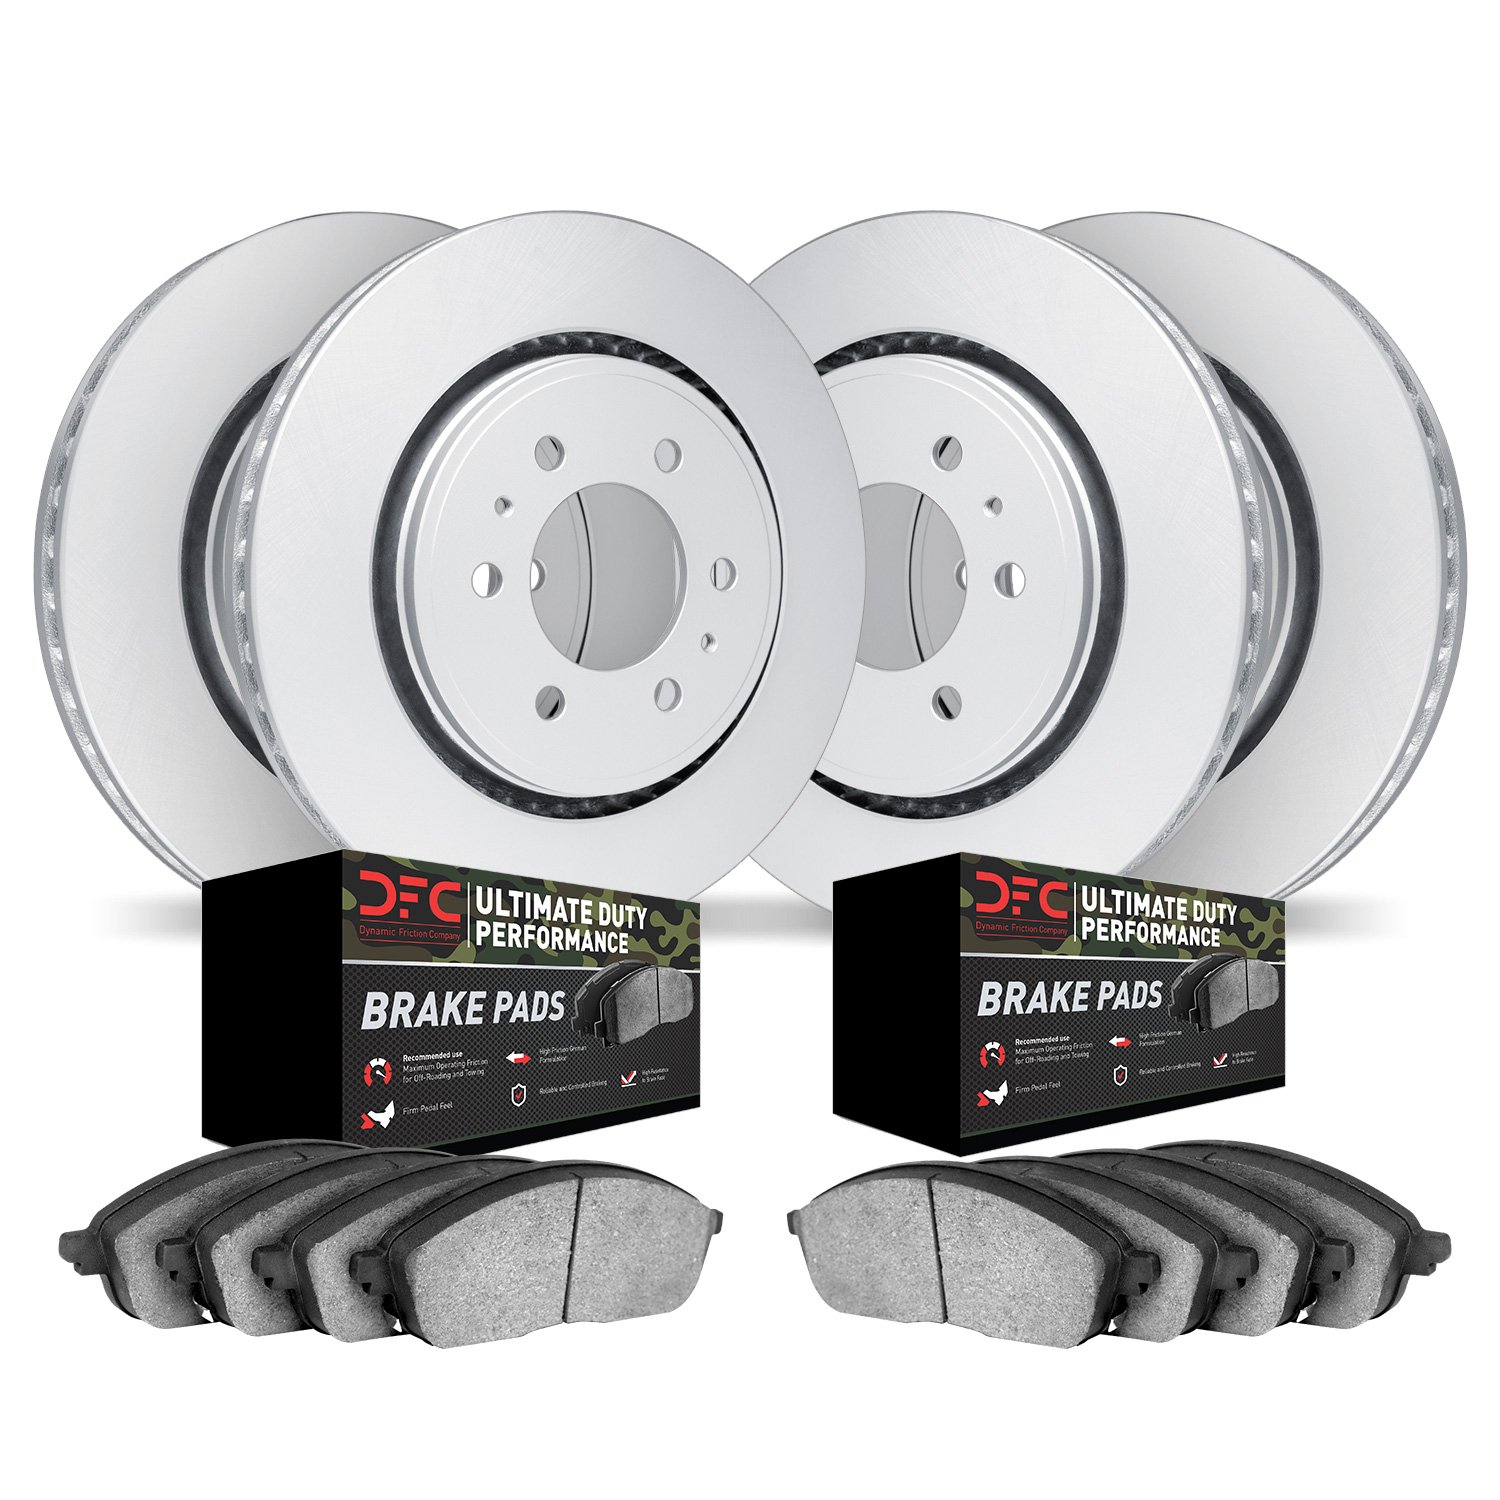 4404-47002 Geospec Brake Rotors with Ultimate-Duty Brake Pads Kit, Fits Select GM, Position: Front and Rear